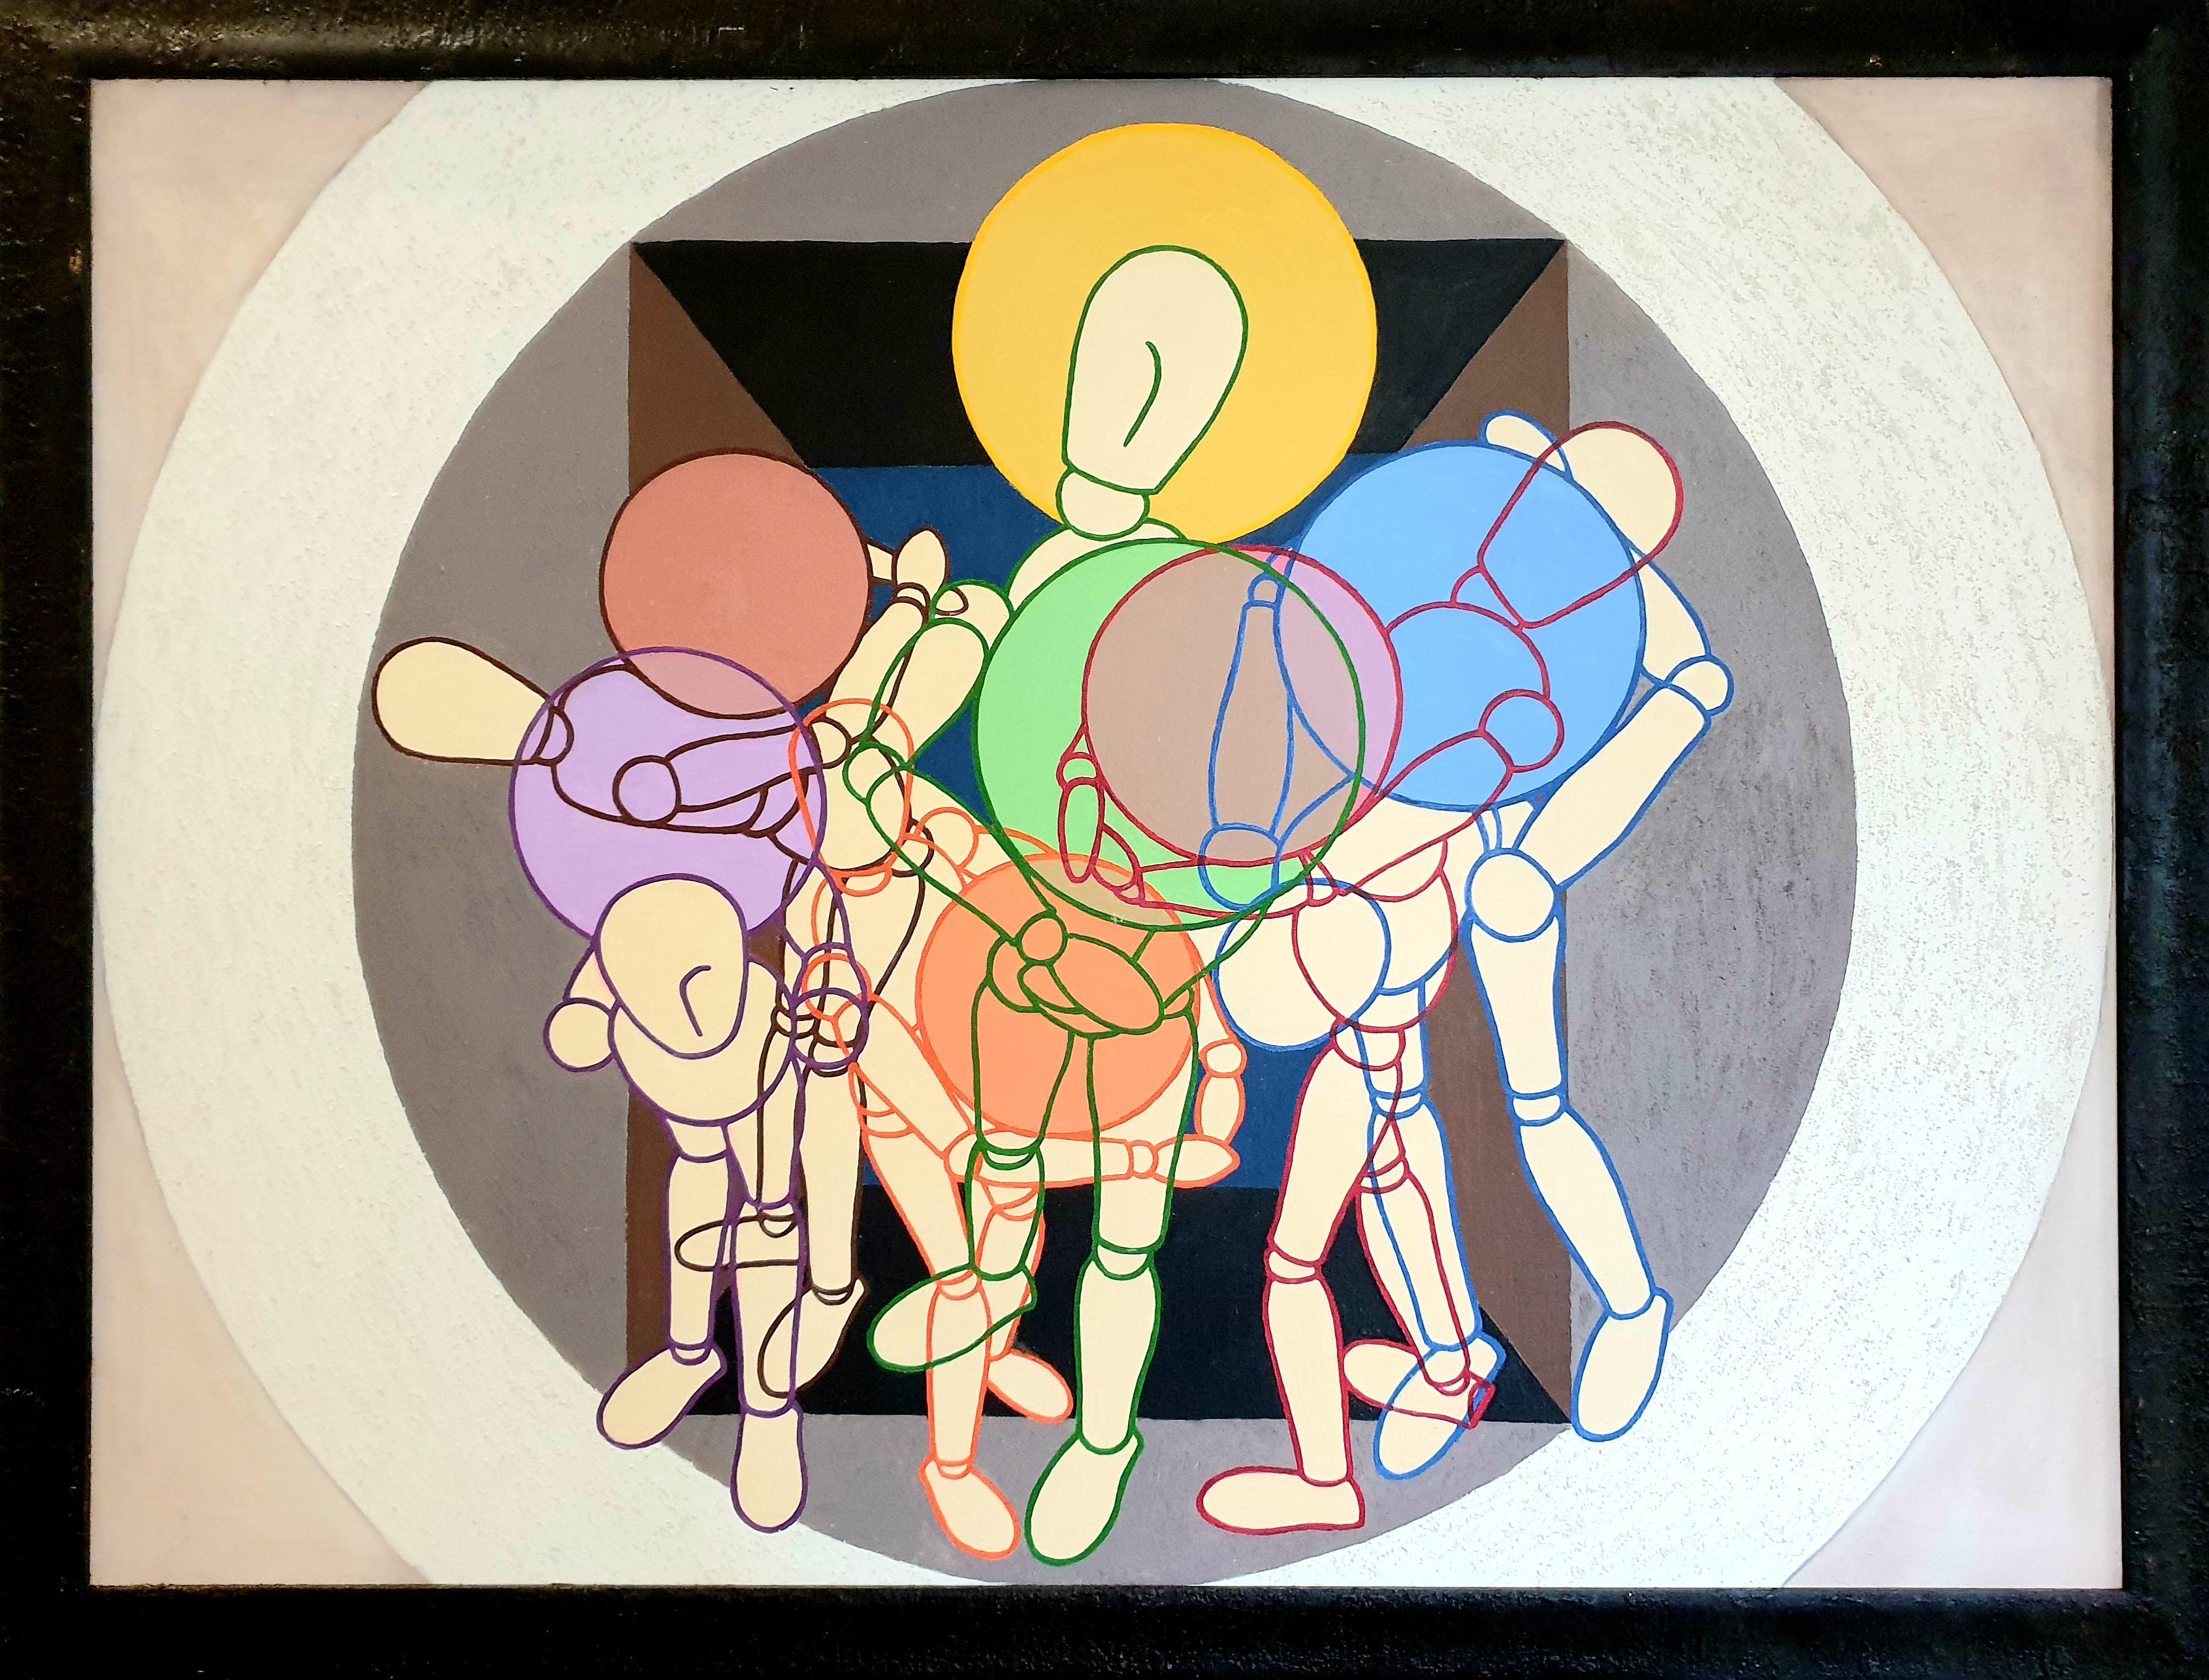 Derek Carruthers Abstract Painting - Large Scale Abstract Geometric Oil on Canvas, Artist's Lay Figures at Play. 